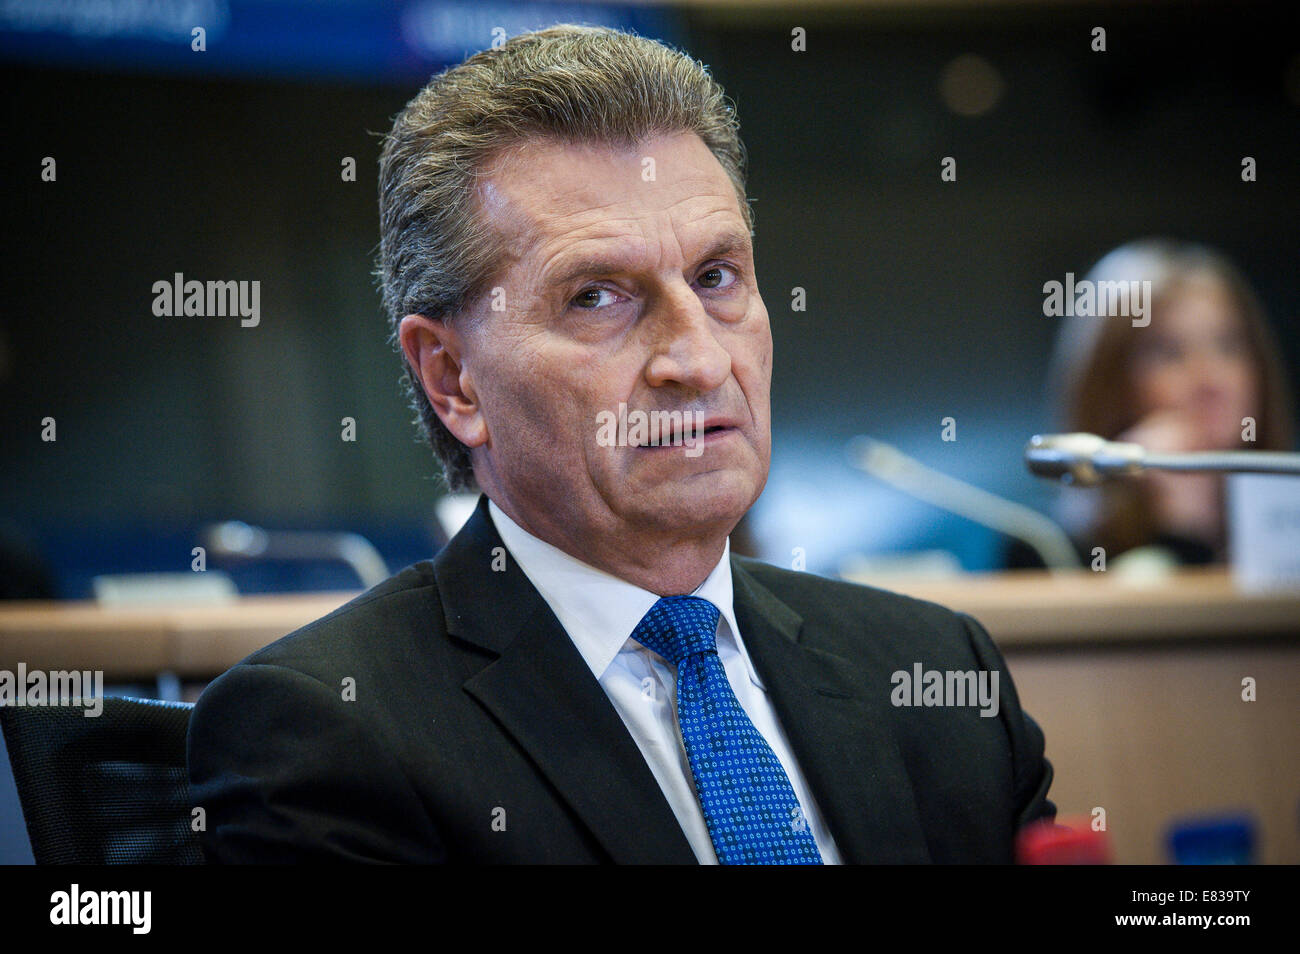 Brussels, Bxl, Belgium. 29th Sep, 2014. EU Commissioner-designate for the digital economy and society, Guenther Oettinger from Germany during a hearing by the Committee on Industry, Research and Energy, the Committee on Culture and Education, the Committee on Internal Market and Consumer Protection, the commision of Legal Affairs and the Committee on Civil Liberties, Justice and Home Affairs, at the European Parliament in Brussels, Belgium on 29.09.2014 by Wiktor Dabkowski Credit:  Wiktor Dabkowski/ZUMA Wire/Alamy Live News Stock Photo